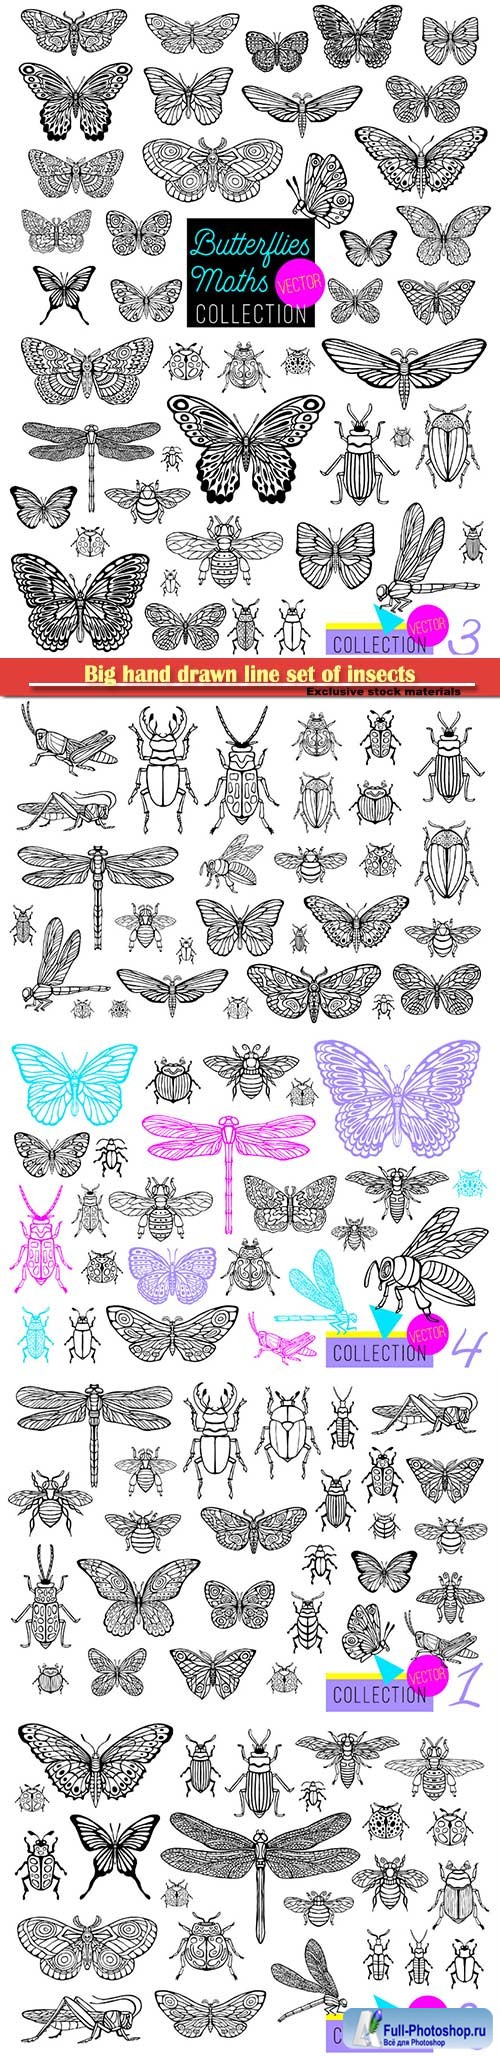 Big hand drawn line set of insects, beetles, honey bees, butterfly moth, bumblebee, wasp, dragonfly, grasshopper